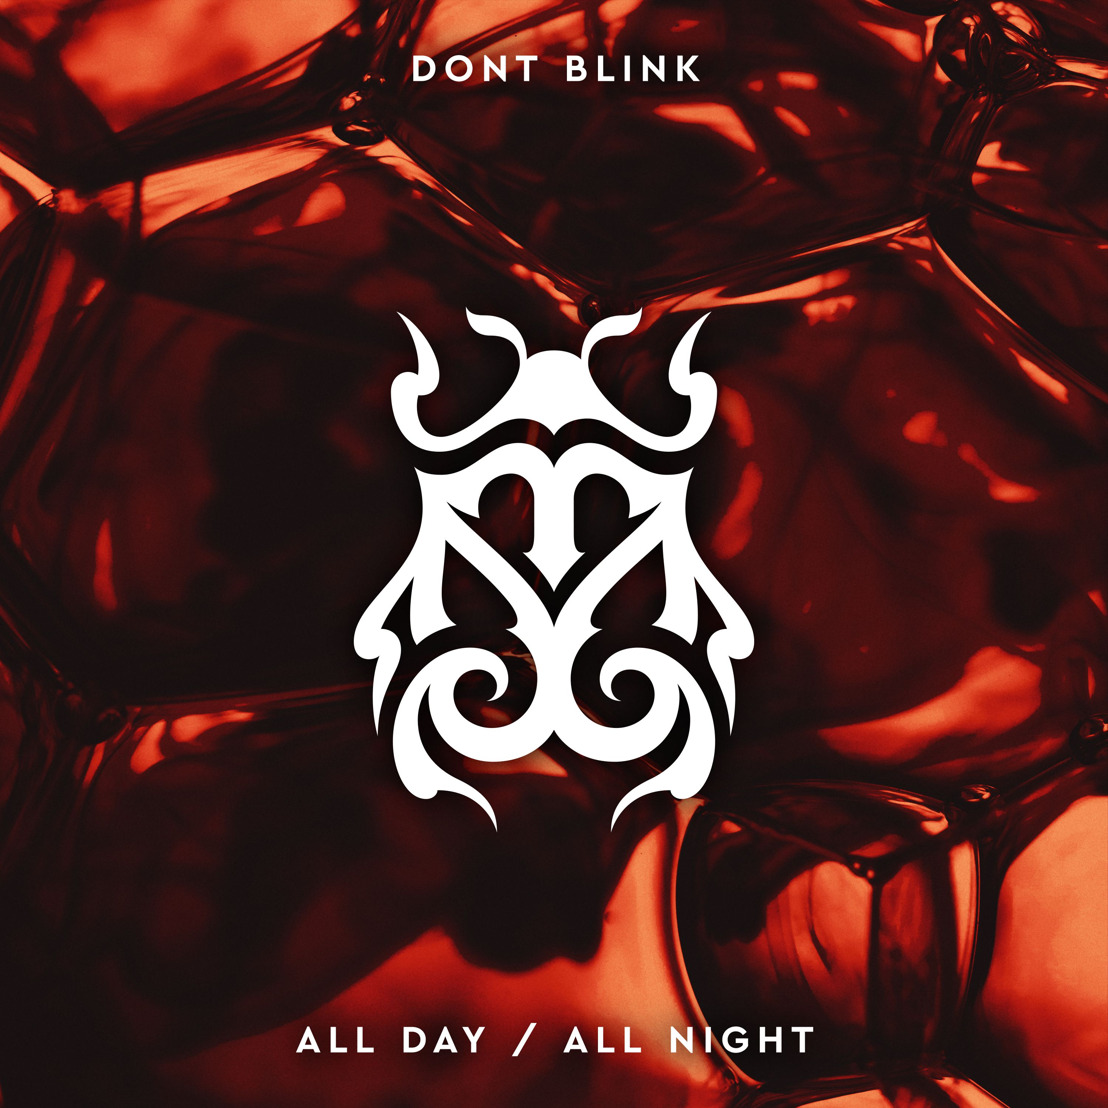 DONT BLINK deliver an infectious tech house floor filler ‘ALL DAY / ALL NIGHT’